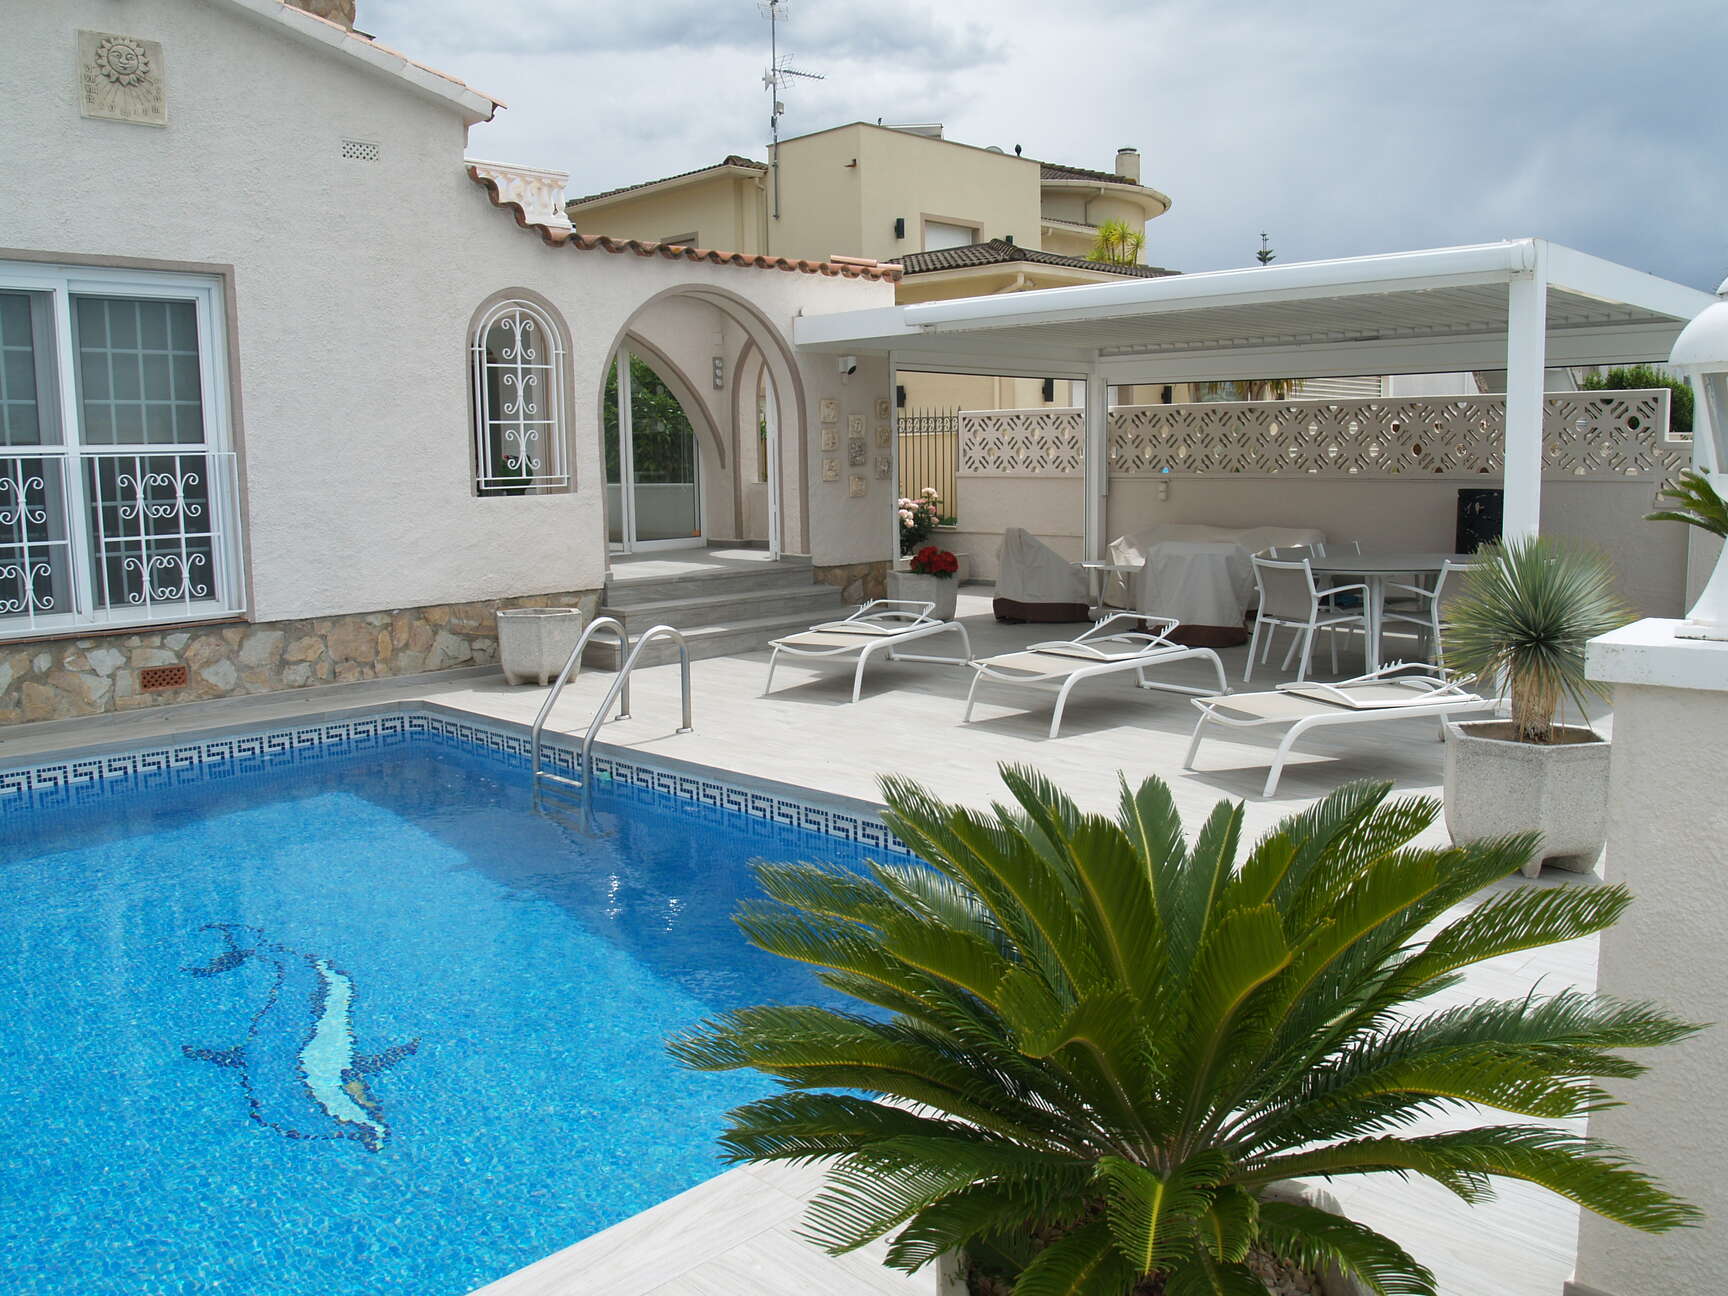 canal-house-with-morring-for-sale-wiht-pool-in-empuriabrava-674